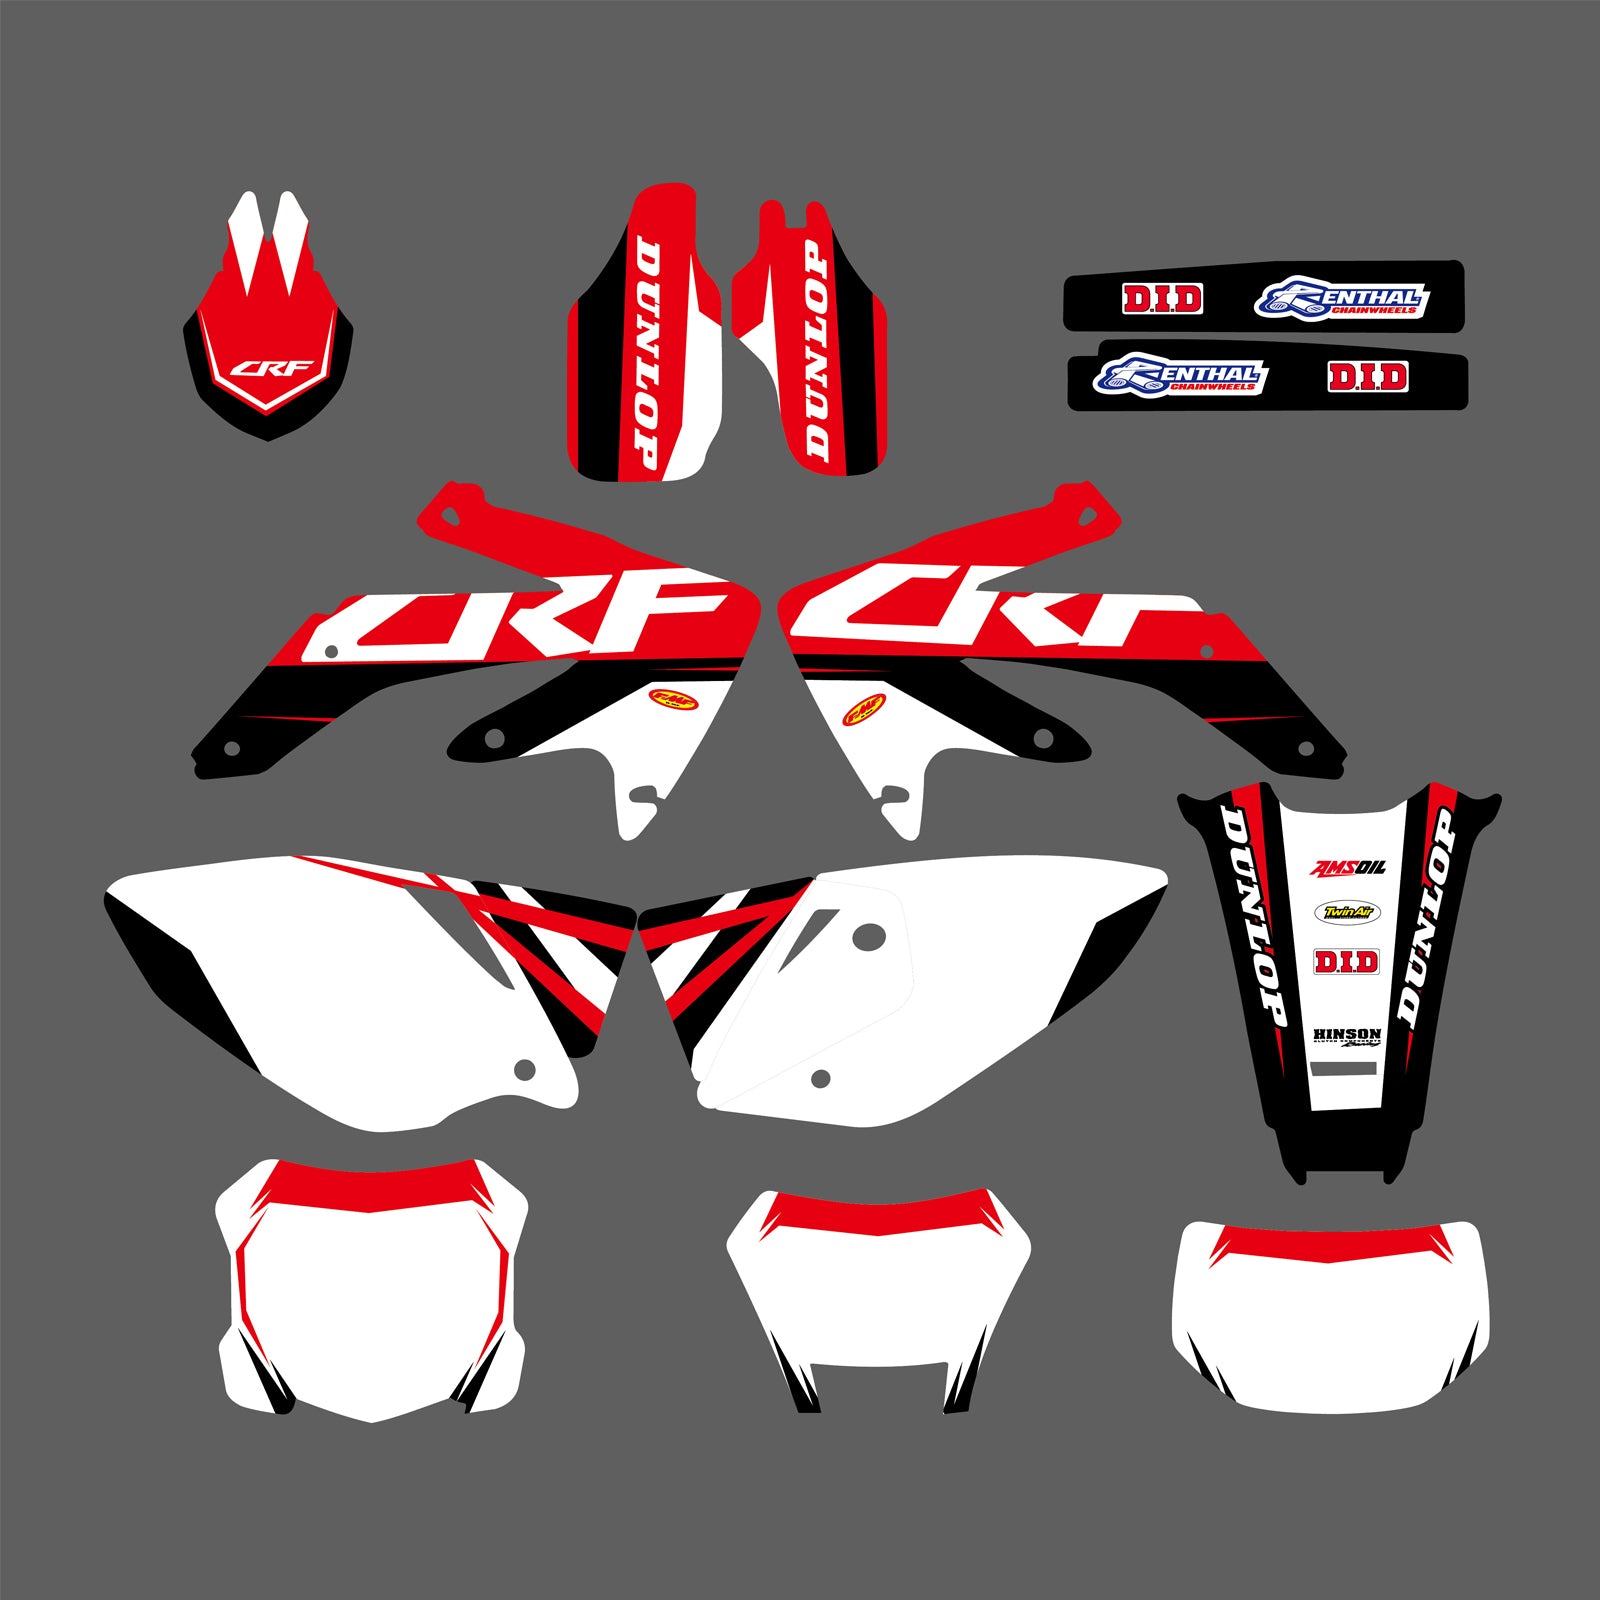 Motorcycle Full Graphic Background Decal Sticker for Honda CRF450X 2005-2016